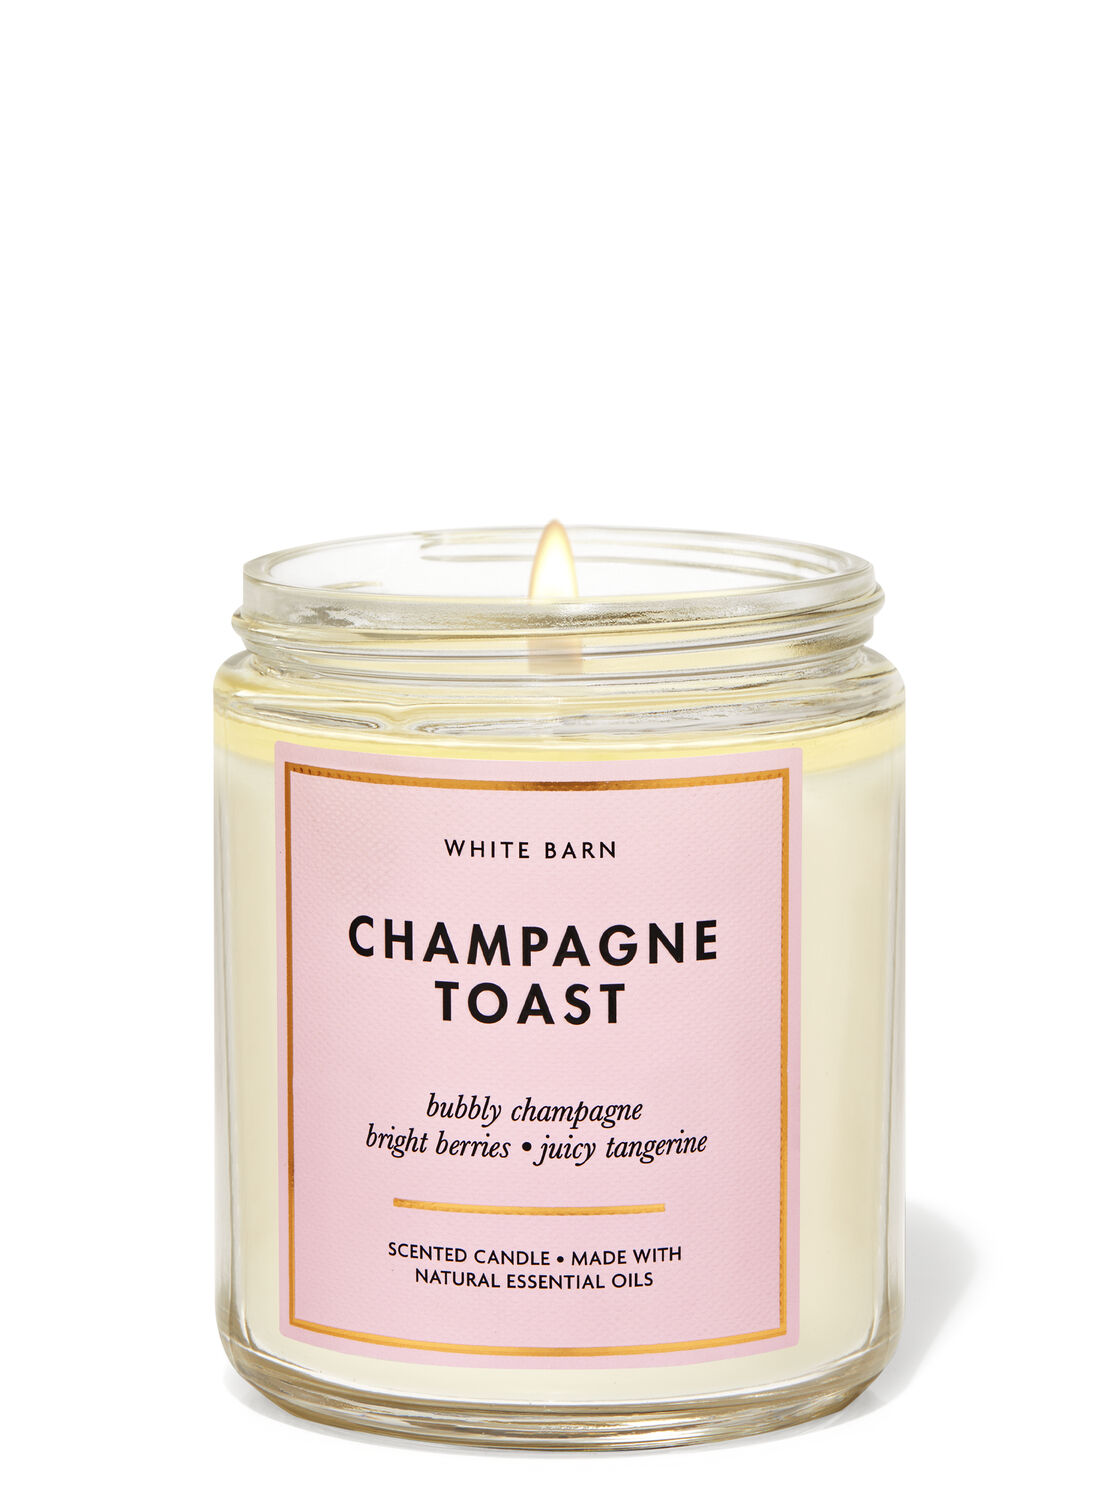 Bath & Body Works White Barn Champagne Toast Large Scented 3 Wick Candles 14.5 